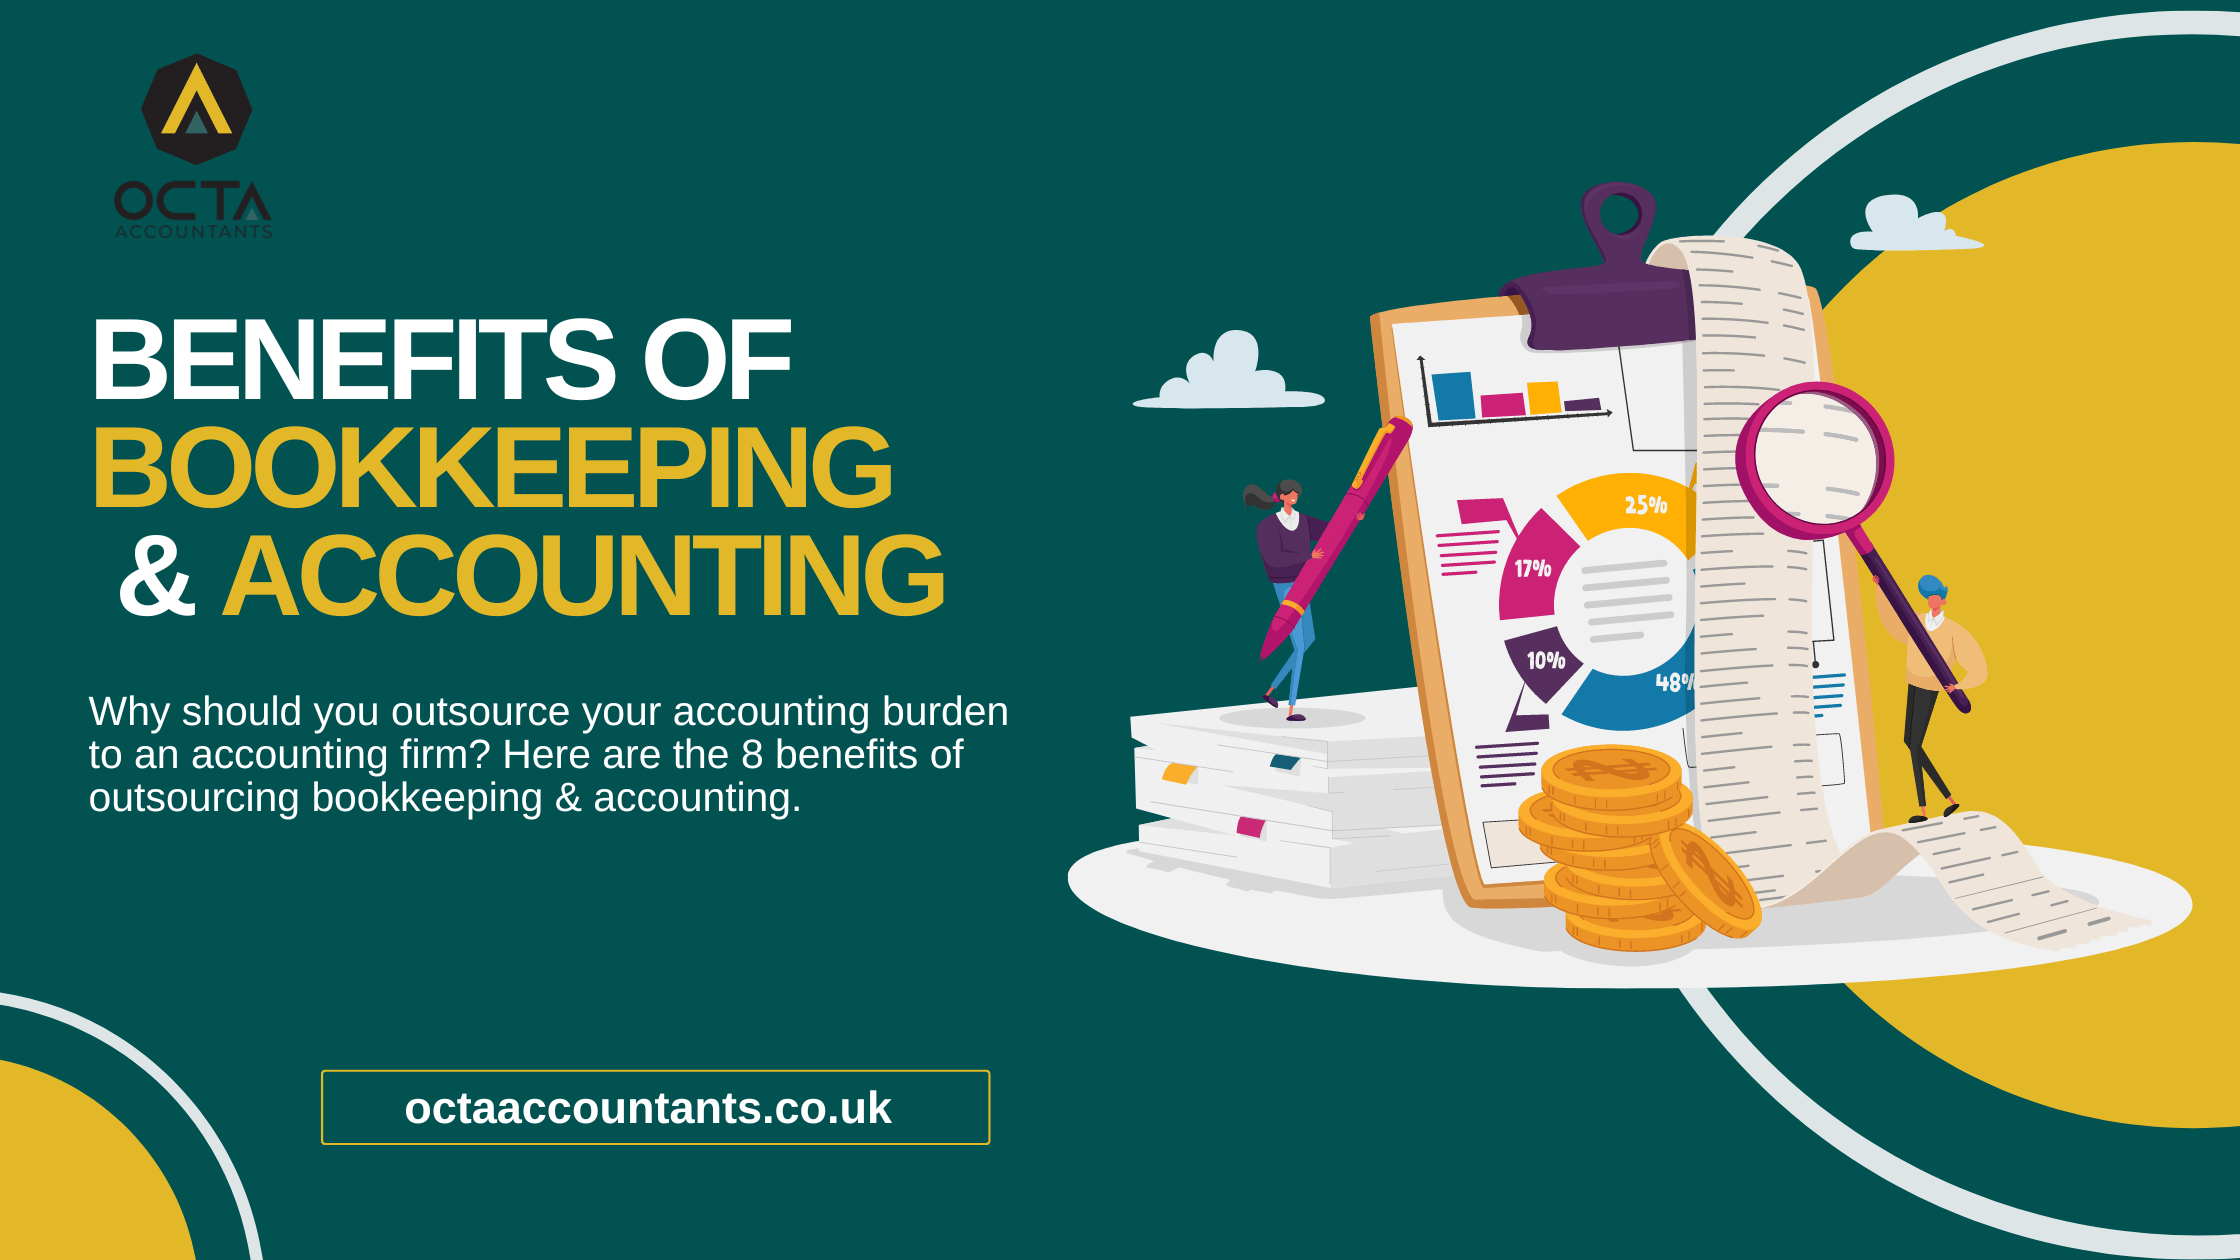 Benefits of Outsourcing Bookkeeping & Accounting